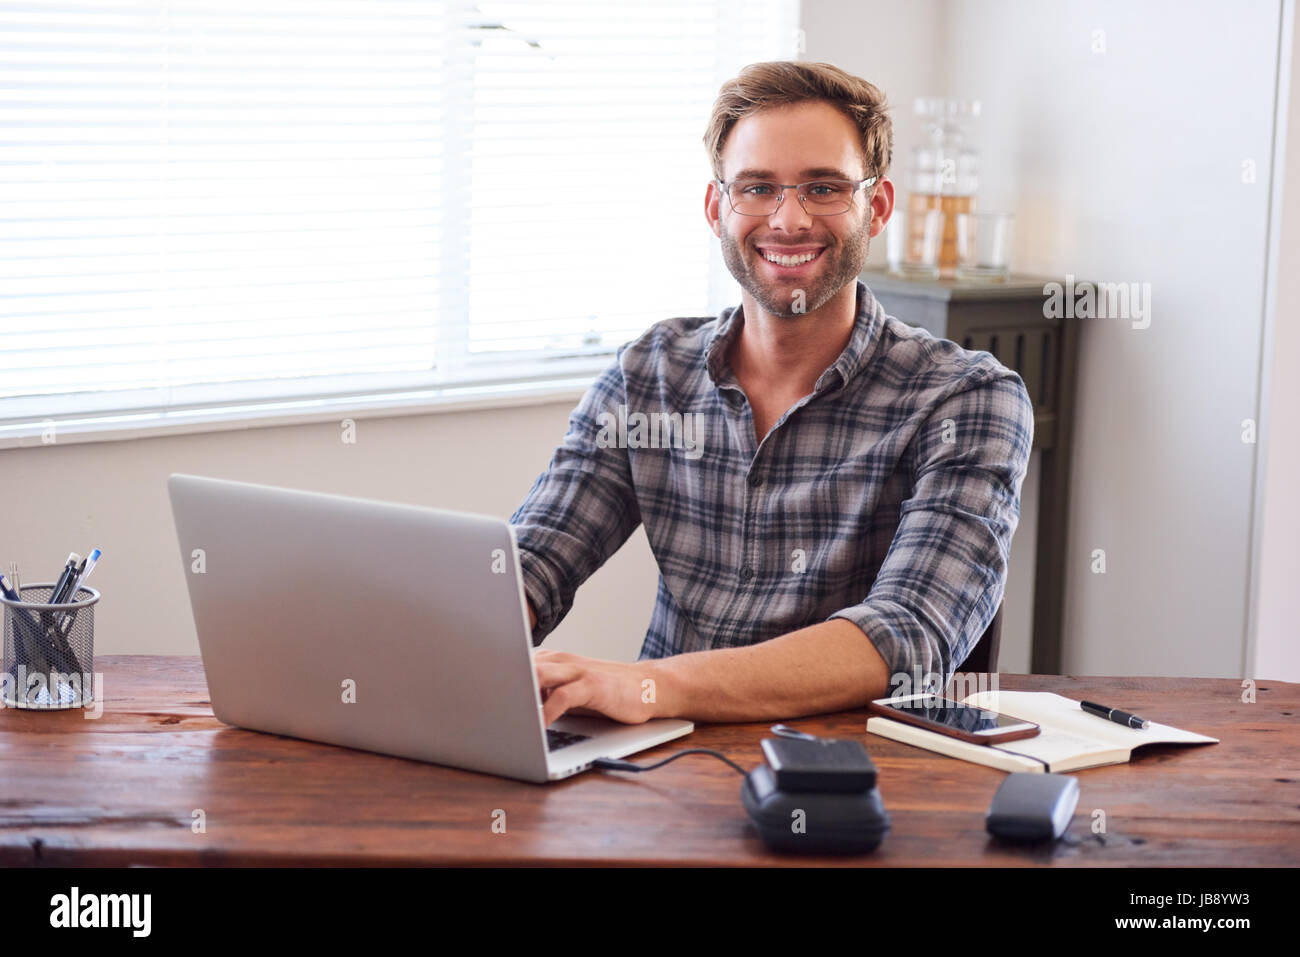 Attractive young, well groomed caucasian male entrepreneur and businessman smiling at the camera with his hands on the keyboard of his laptop computer Stock Photo